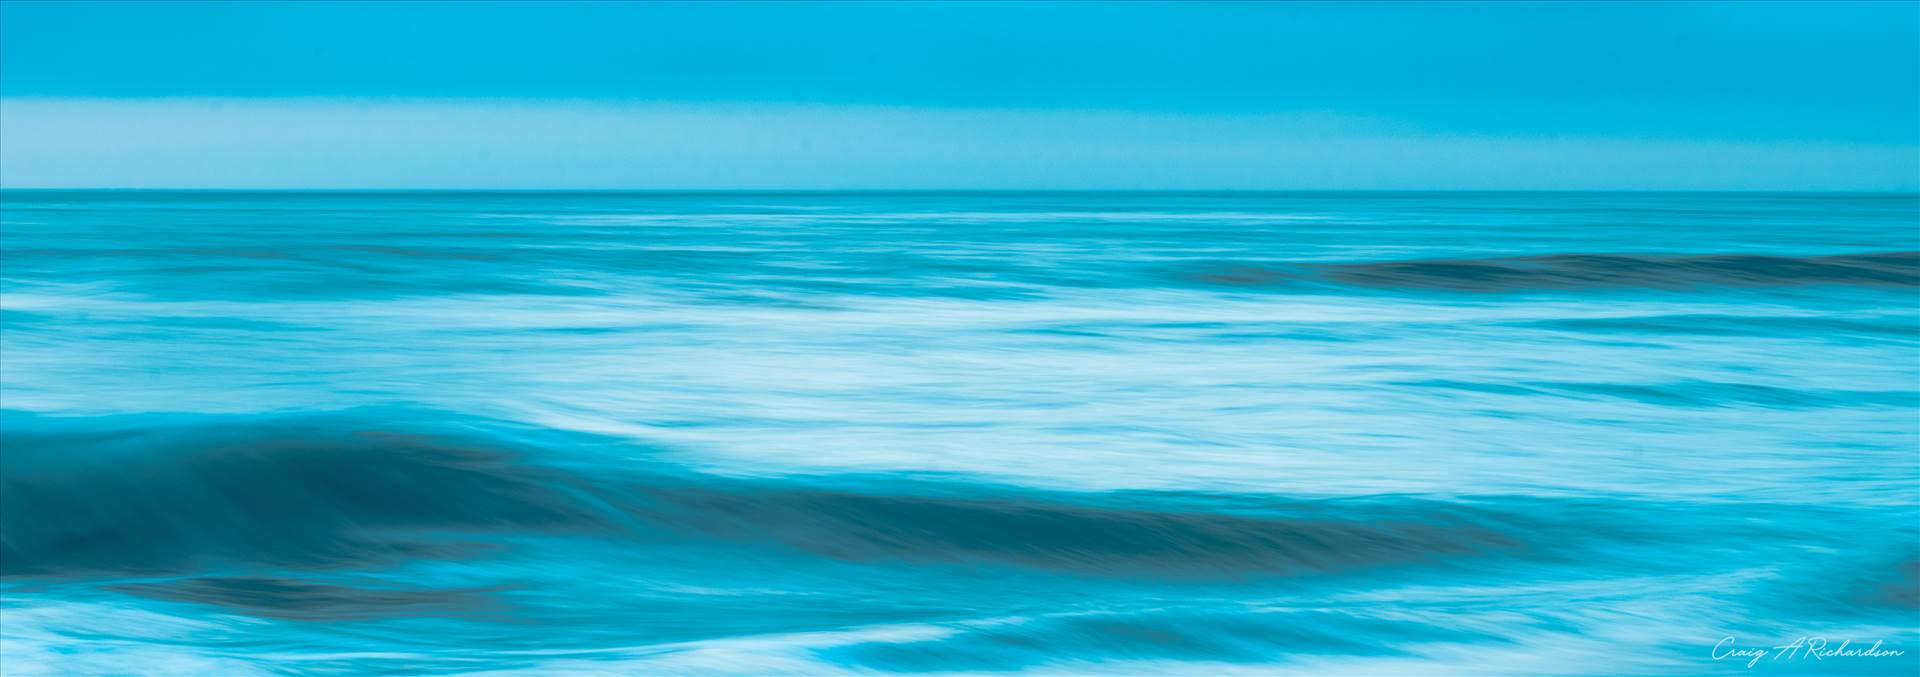 Into The Blue. Intentional camera movement (ICM) is how this beautiful image of Cornish waves was created. ICM is a technique which gives this image it's surreal abstract feel. by Craig A Richardson Photography